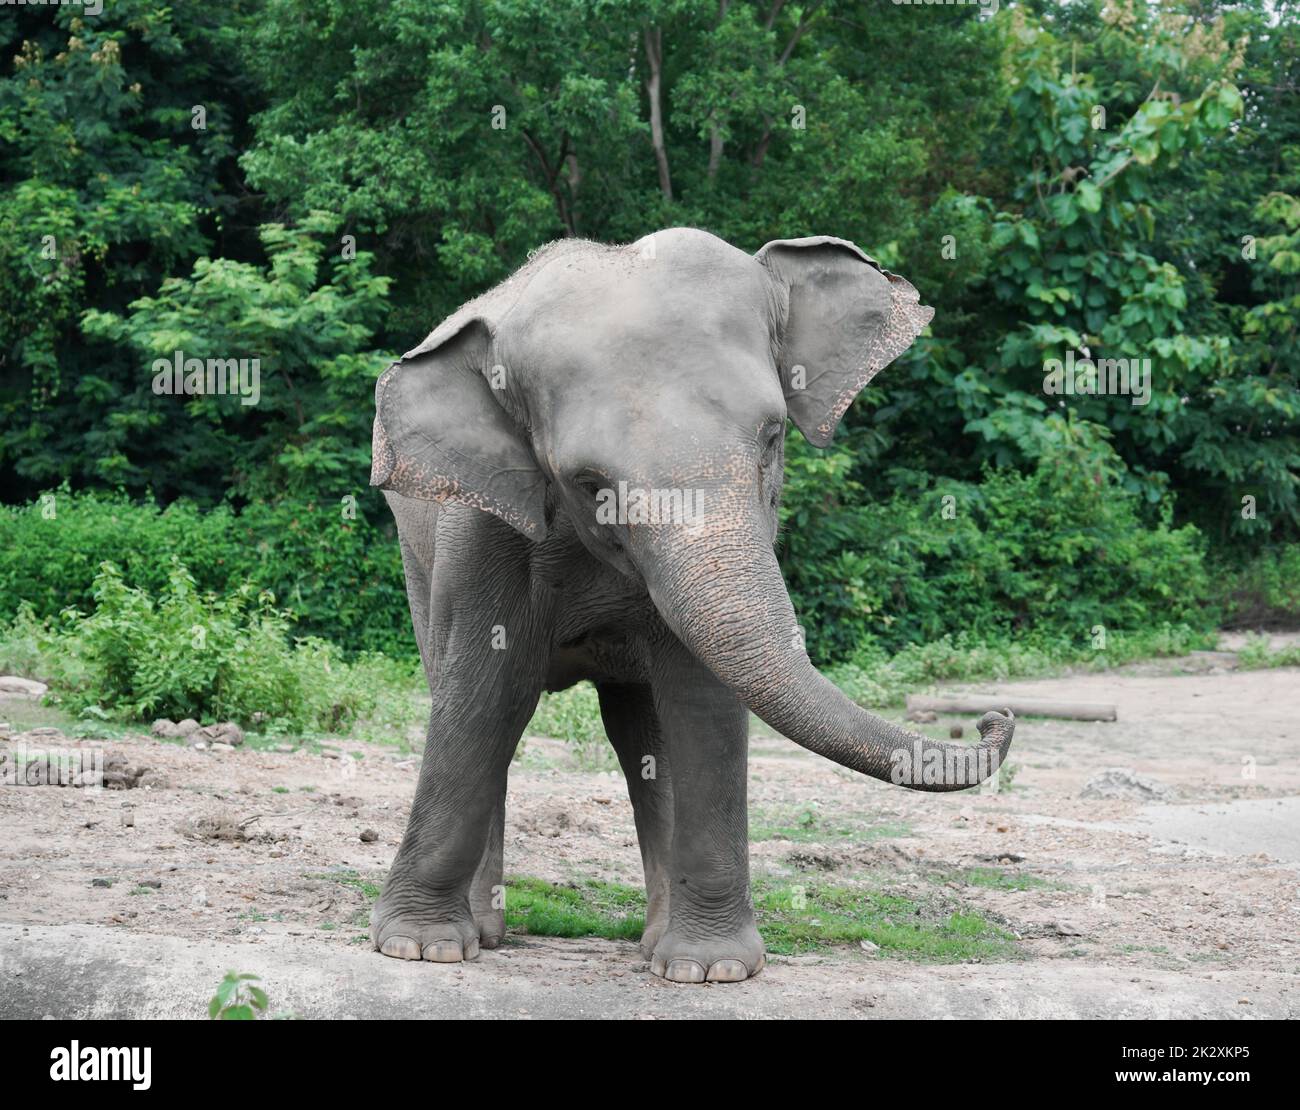 young asiatic elephant at zoo Stock Photo